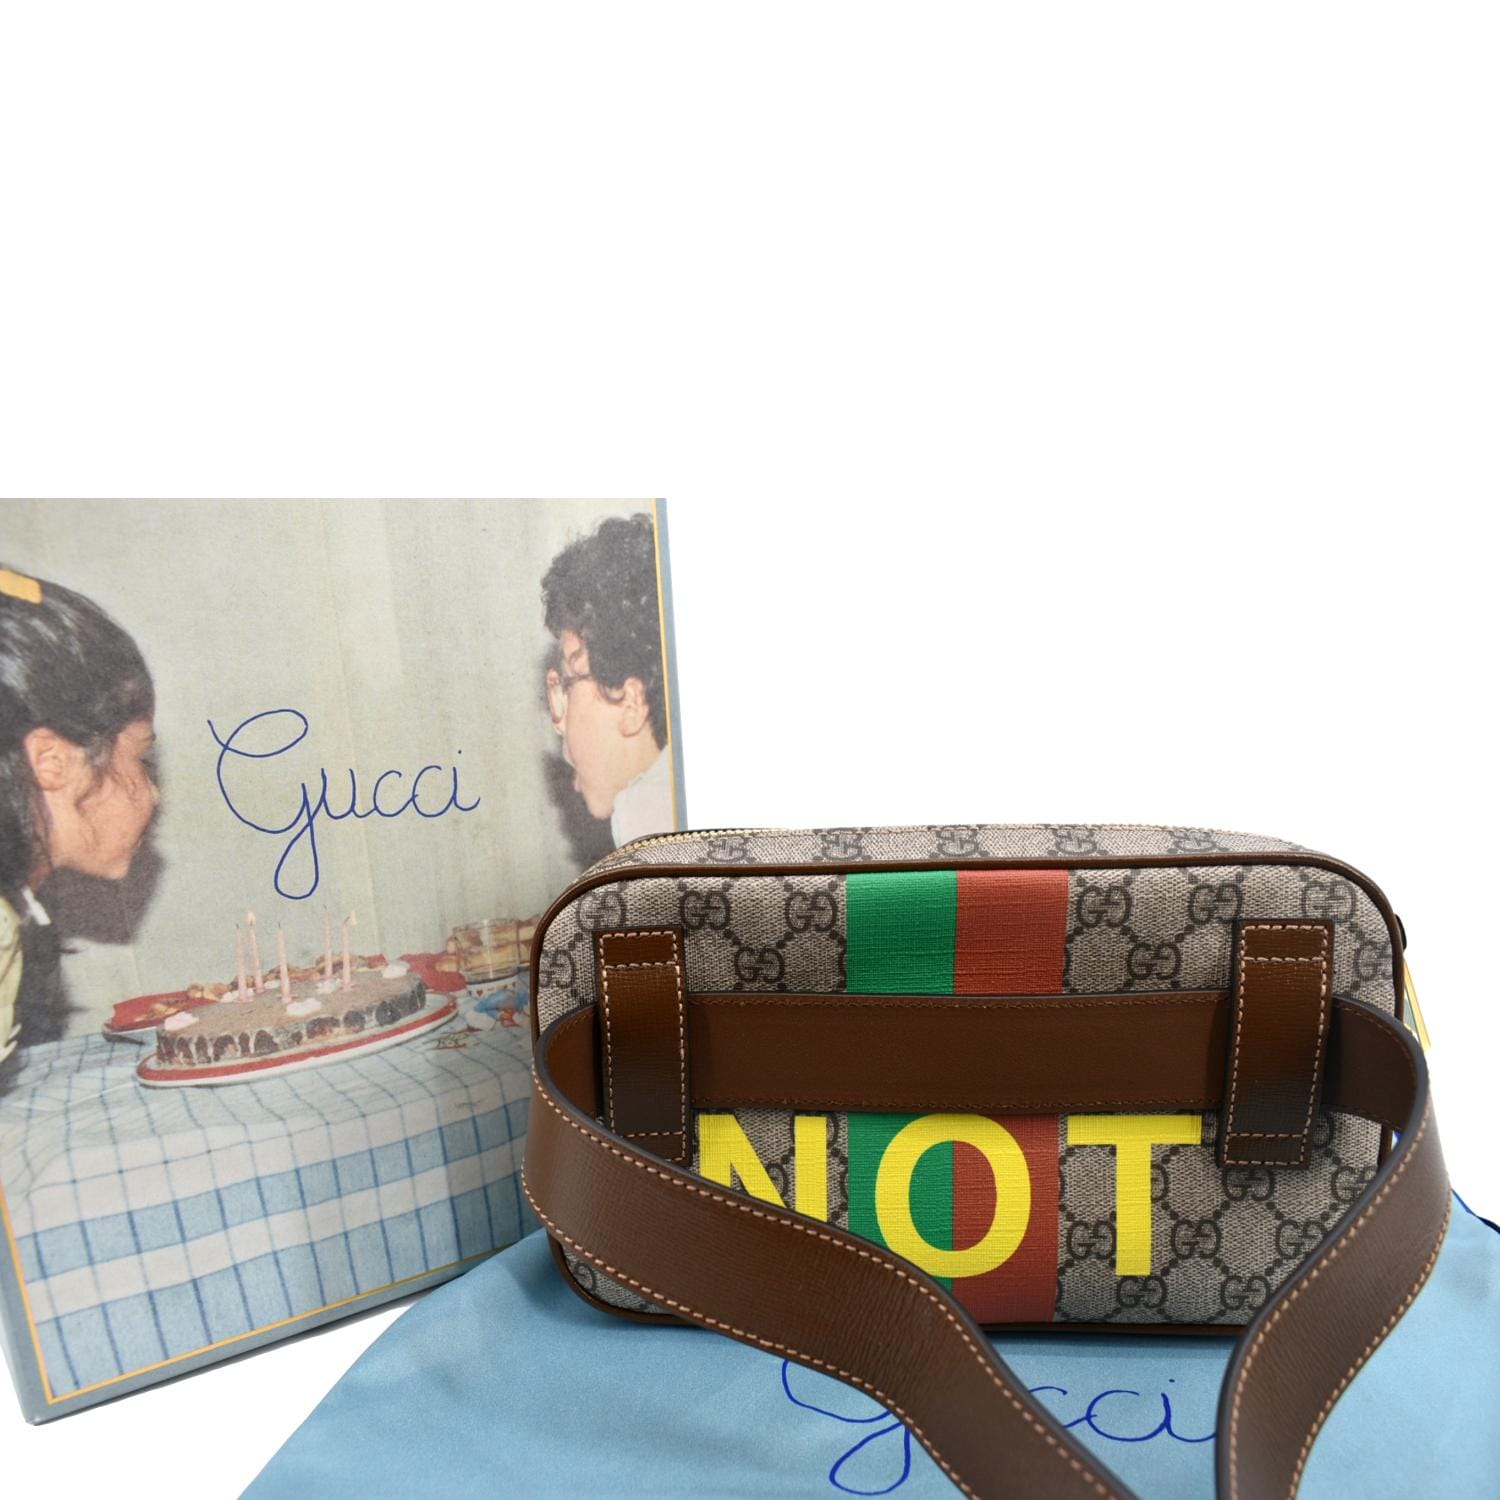 Difference between genuine and fake luxury products - Gucci belts